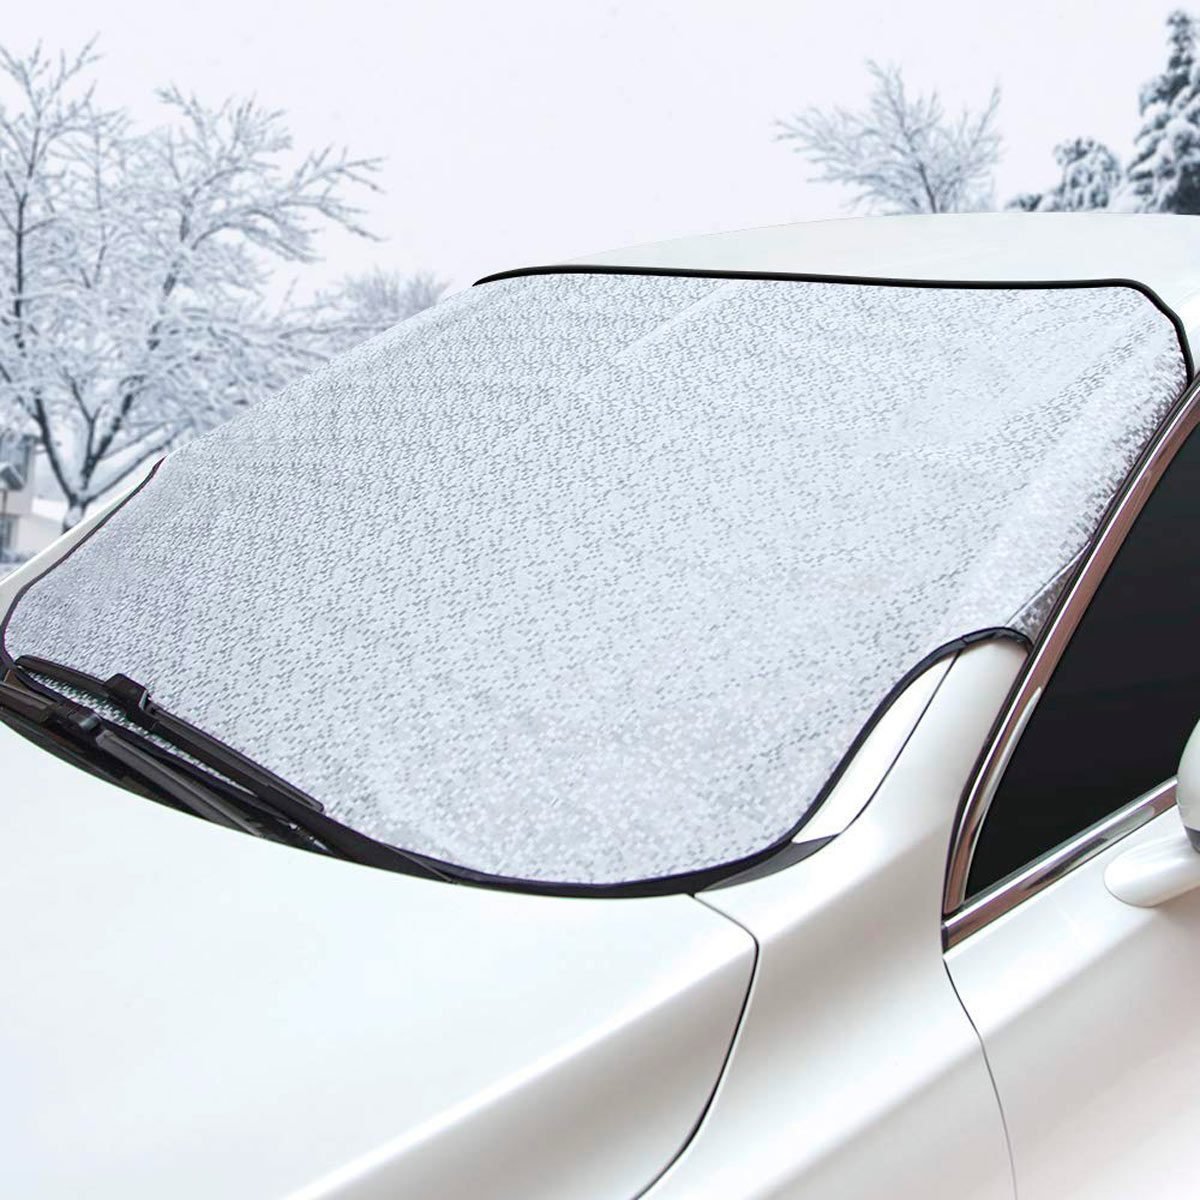 Car Windscreen Frost Cover- Window Screen Cover for Winter- Car